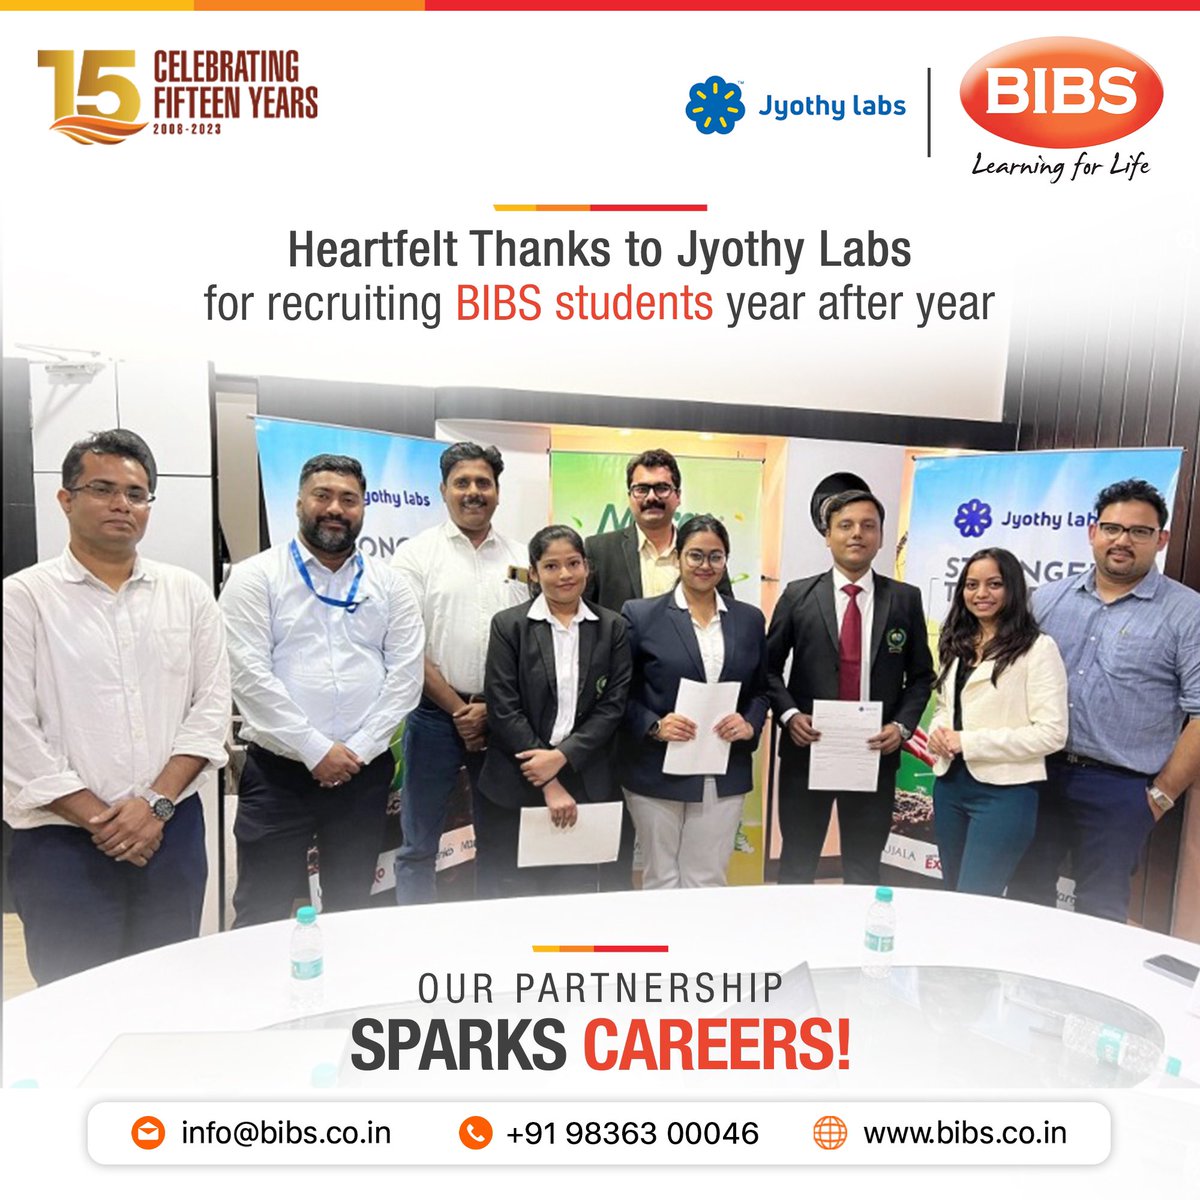 We deeply appreciate Jyothy Labs's consistent support in shaping our students’ careers. Your leadership has fostered numerous success stories, empowering our students to excel and contribute significantly to the business world.
#Jyothylabs #bibs #bibskolkata #bibsmba #placements